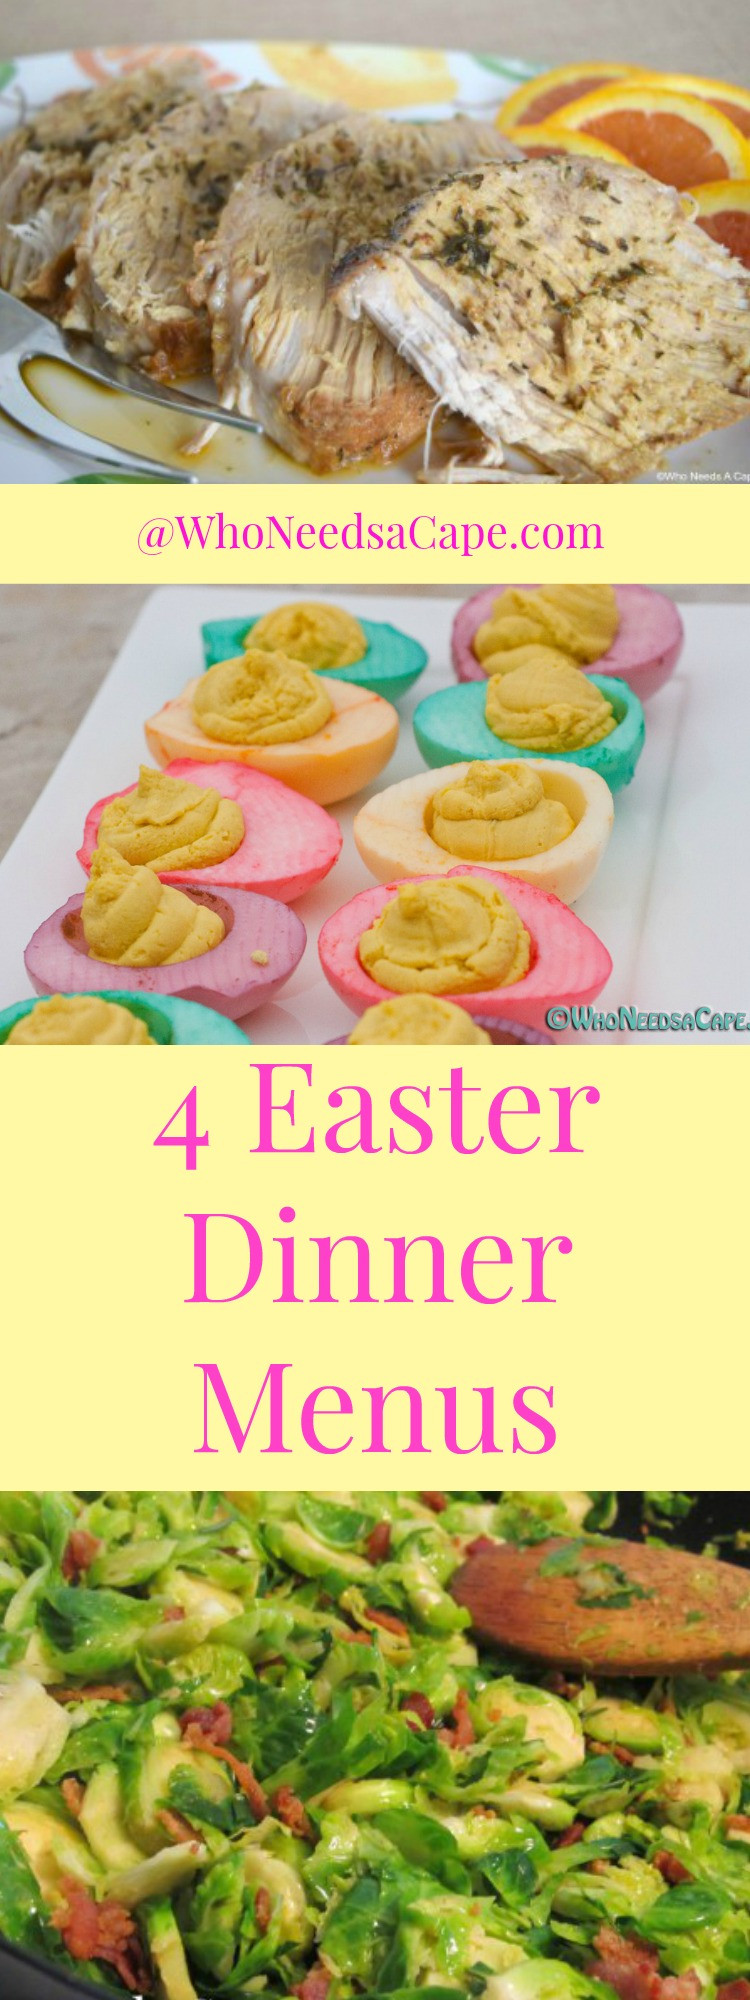 Easter Dinner Take Out
 Easter Dinner Menus Who Needs A Cape